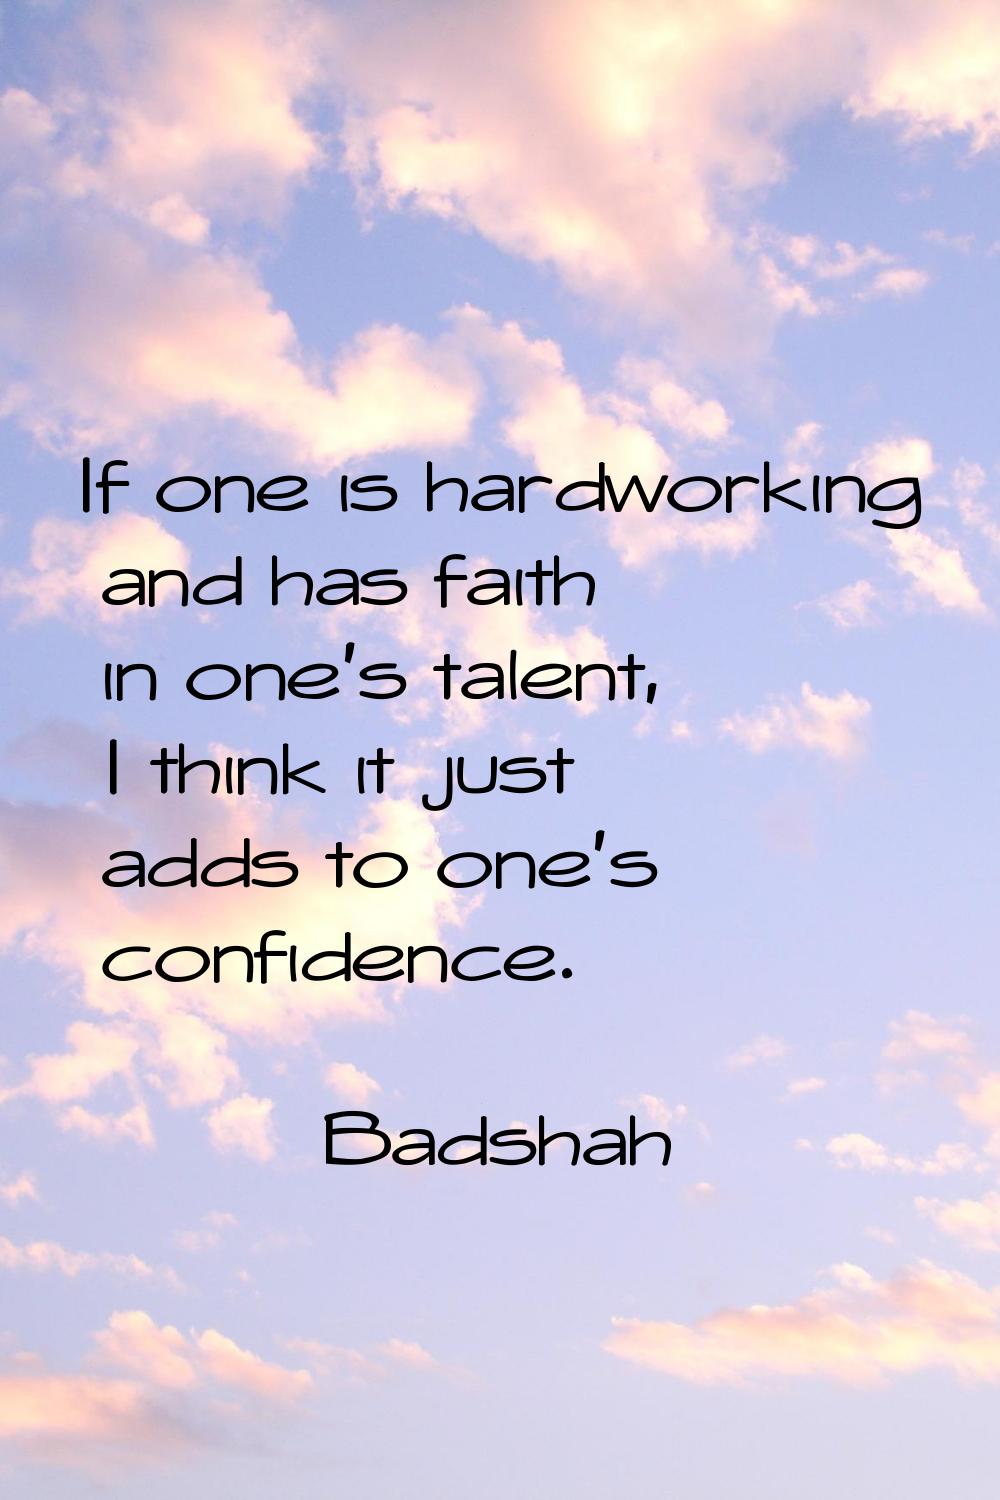 If one is hardworking and has faith in one's talent, I think it just adds to one's confidence.